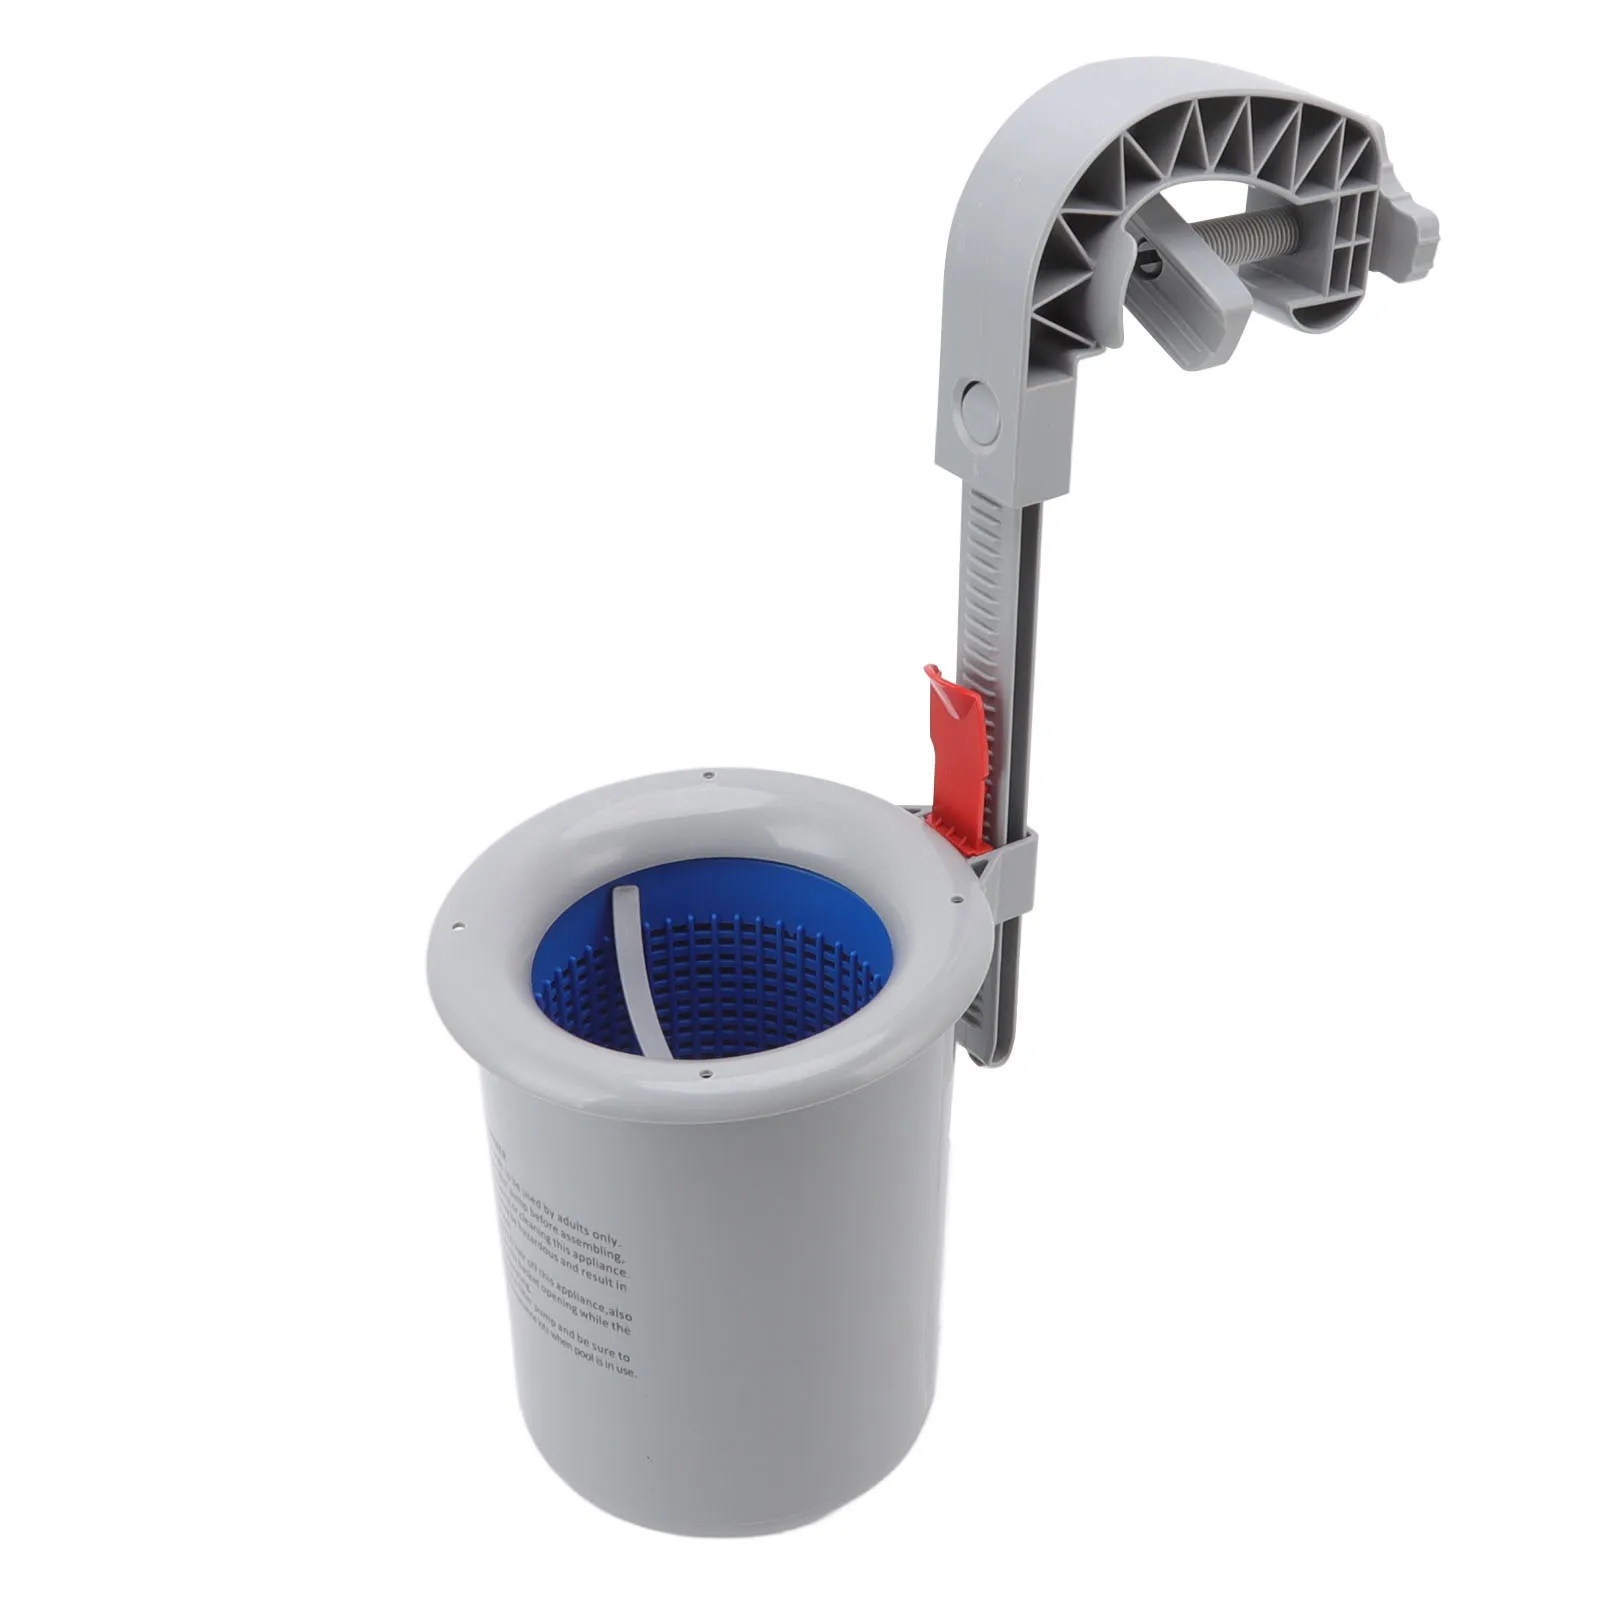 Pool Surface Skimmer Wall Mounted Automatic Cleaner Filter Debris Collector Clean Leaves Swimming Pool Clenaing Tool